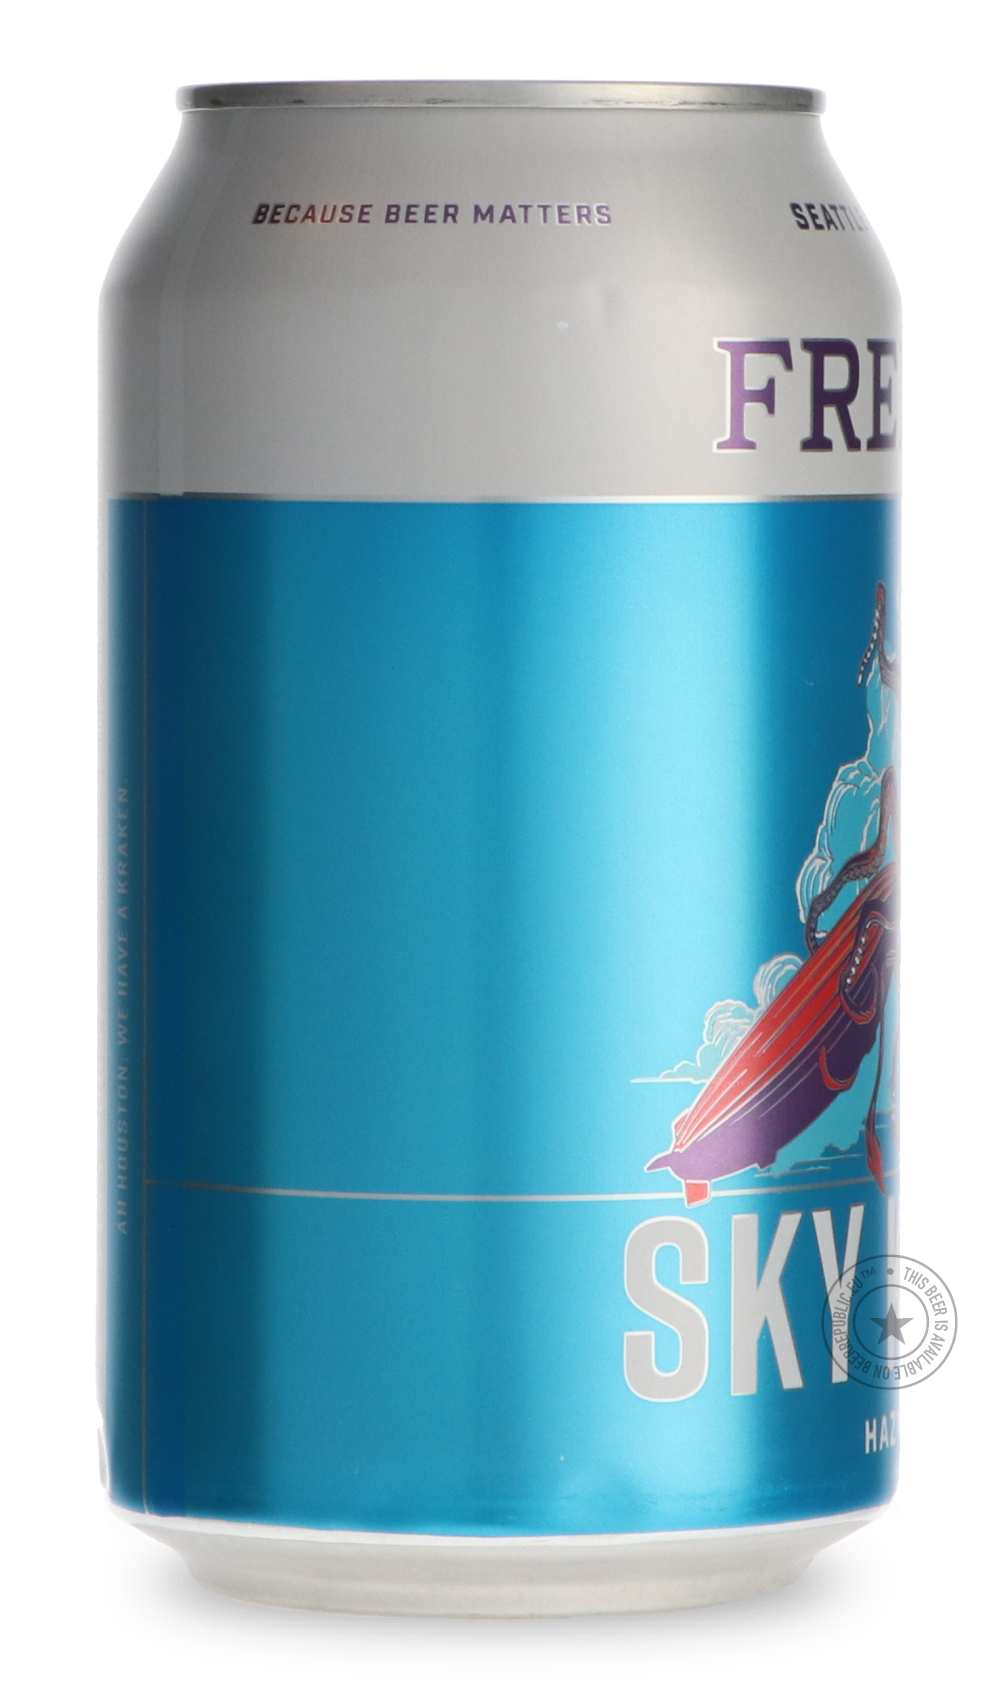 -Fremont- Sky Kraken-Pale- Only @ Beer Republic - The best online beer store for American & Canadian craft beer - Buy beer online from the USA and Canada - Bier online kopen - Amerikaans bier kopen - Craft beer store - Craft beer kopen - Amerikanisch bier kaufen - Bier online kaufen - Acheter biere online - IPA - Stout - Porter - New England IPA - Hazy IPA - Imperial Stout - Barrel Aged - Barrel Aged Imperial Stout - Brown - Dark beer - Blond - Blonde - Pilsner - Lager - Wheat - Weizen - Amber - Barley Wine